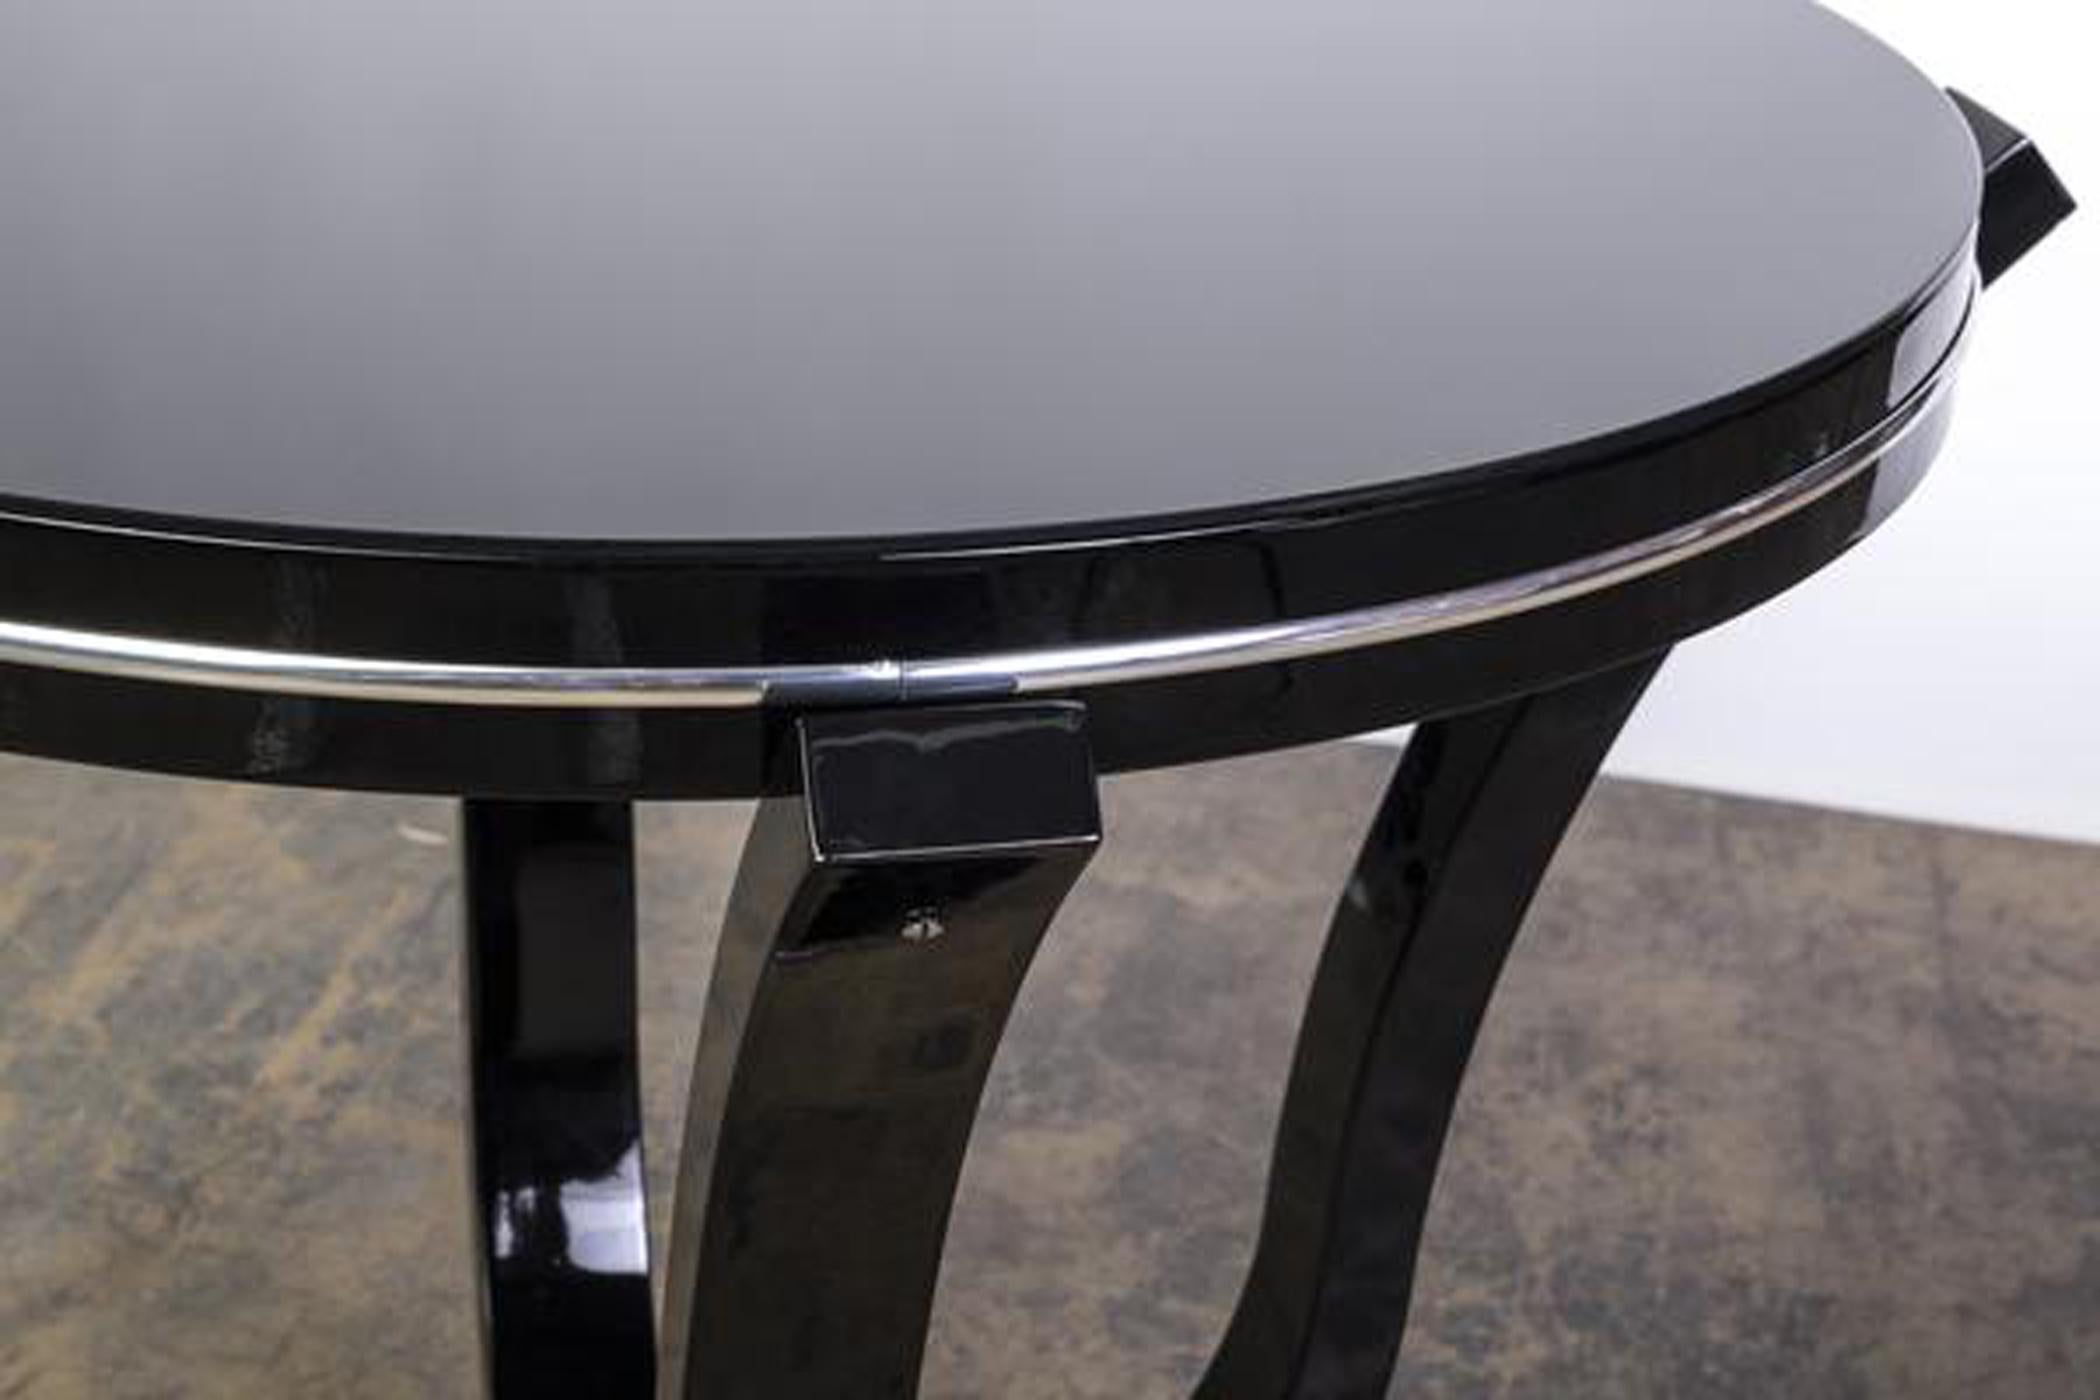 This chic tulip shape Art Deco side table features a round top with four curved legs, chrome detailing and finished in a high gloss black lacquer finish.

Made in France, circa 1925.